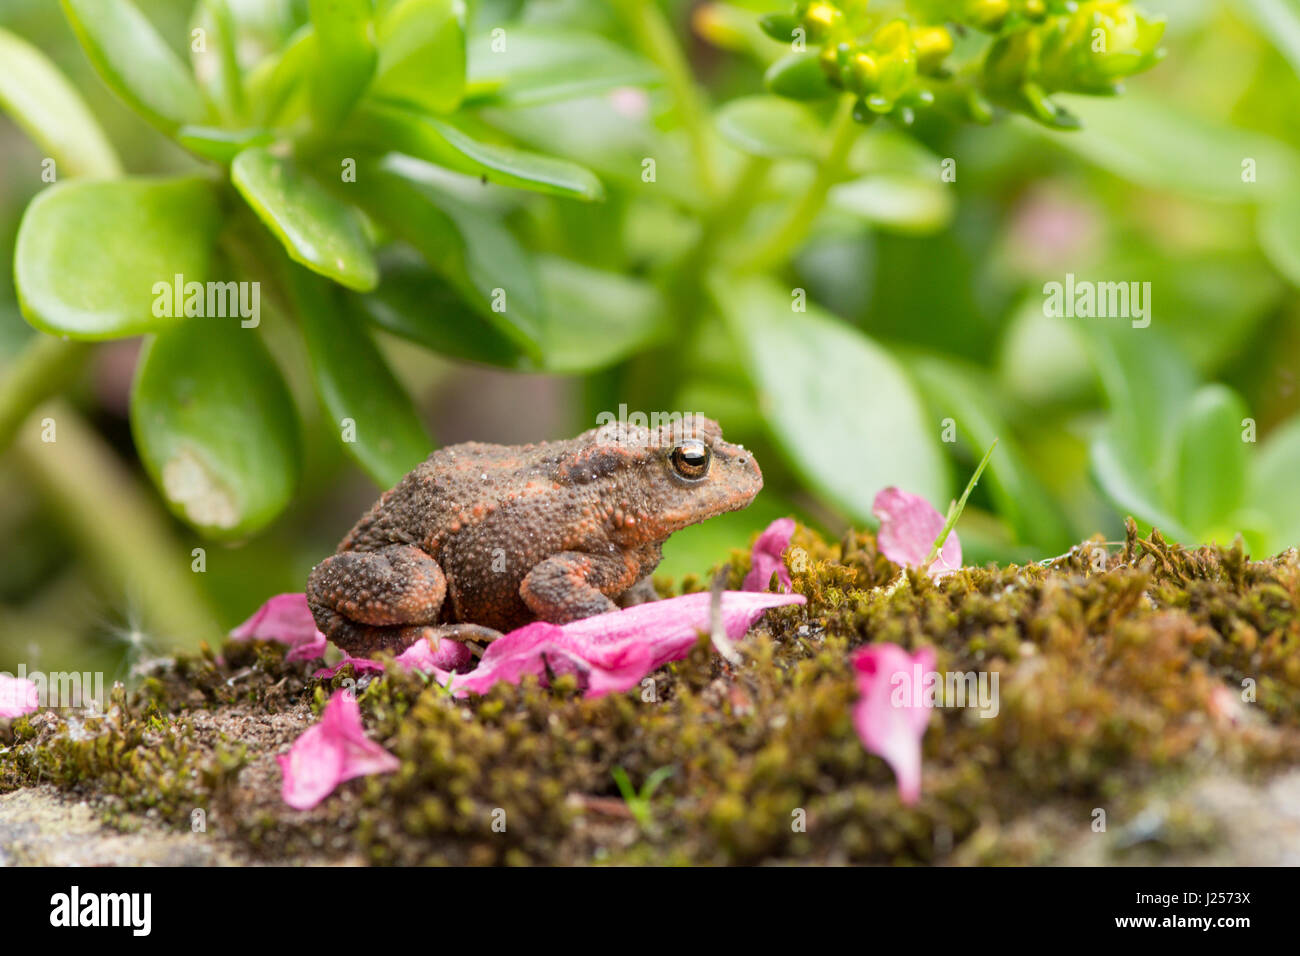 Common Toad, Bufo bufo, juvenile, small, one or two years old. Sussex. Garden. April. Stock Photo